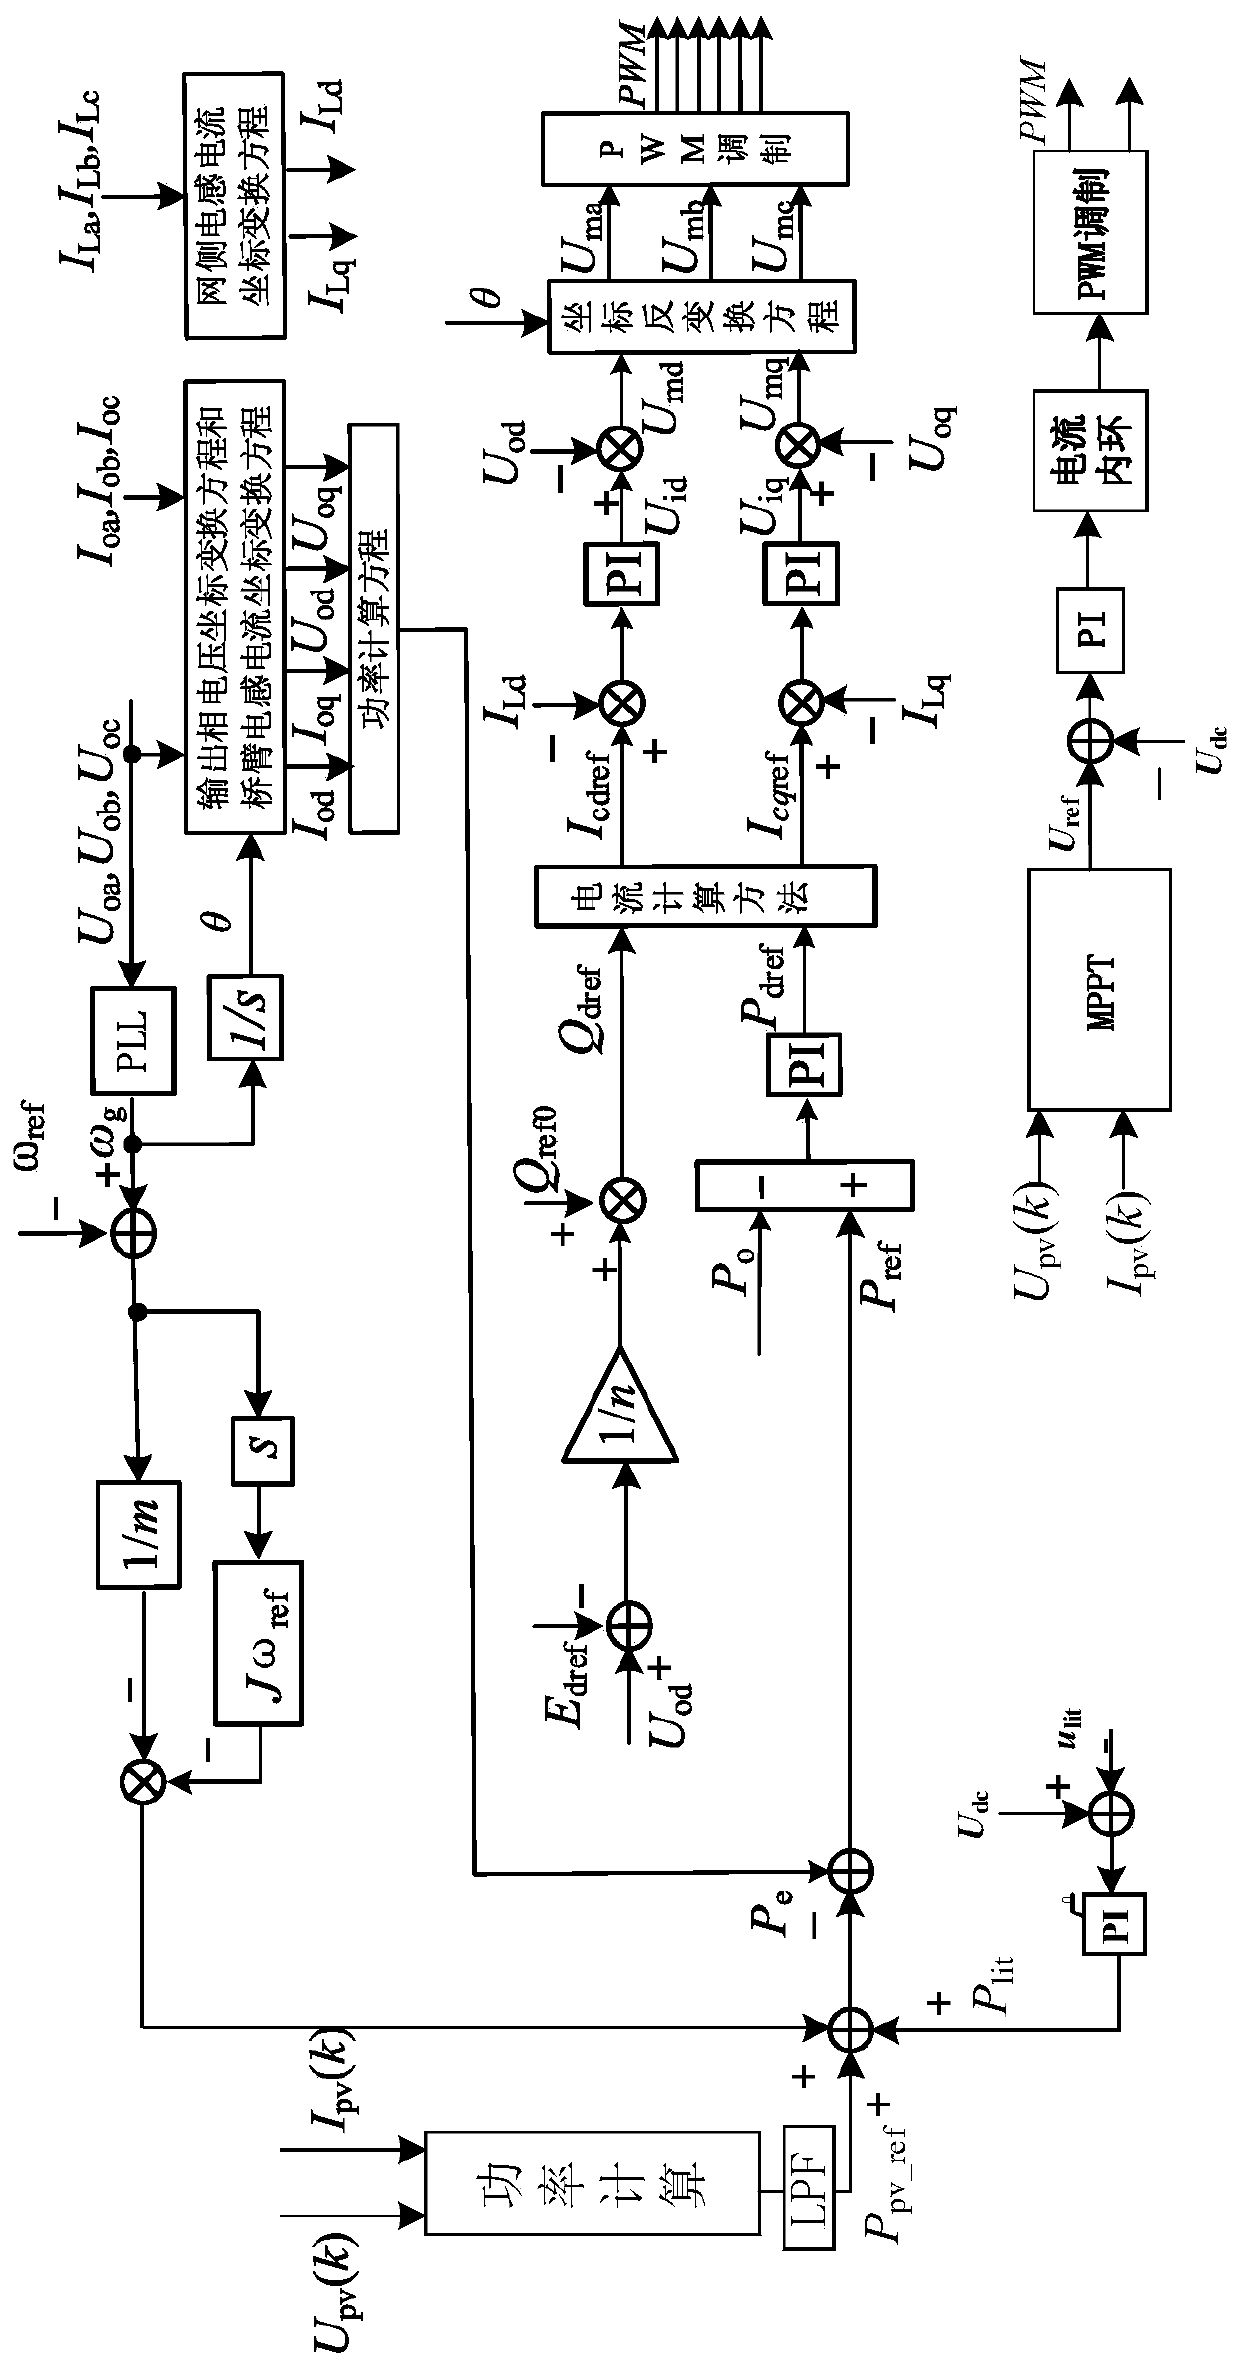 Coordinated control method for photovoltaic virtual synchronous generator based on common DC bus